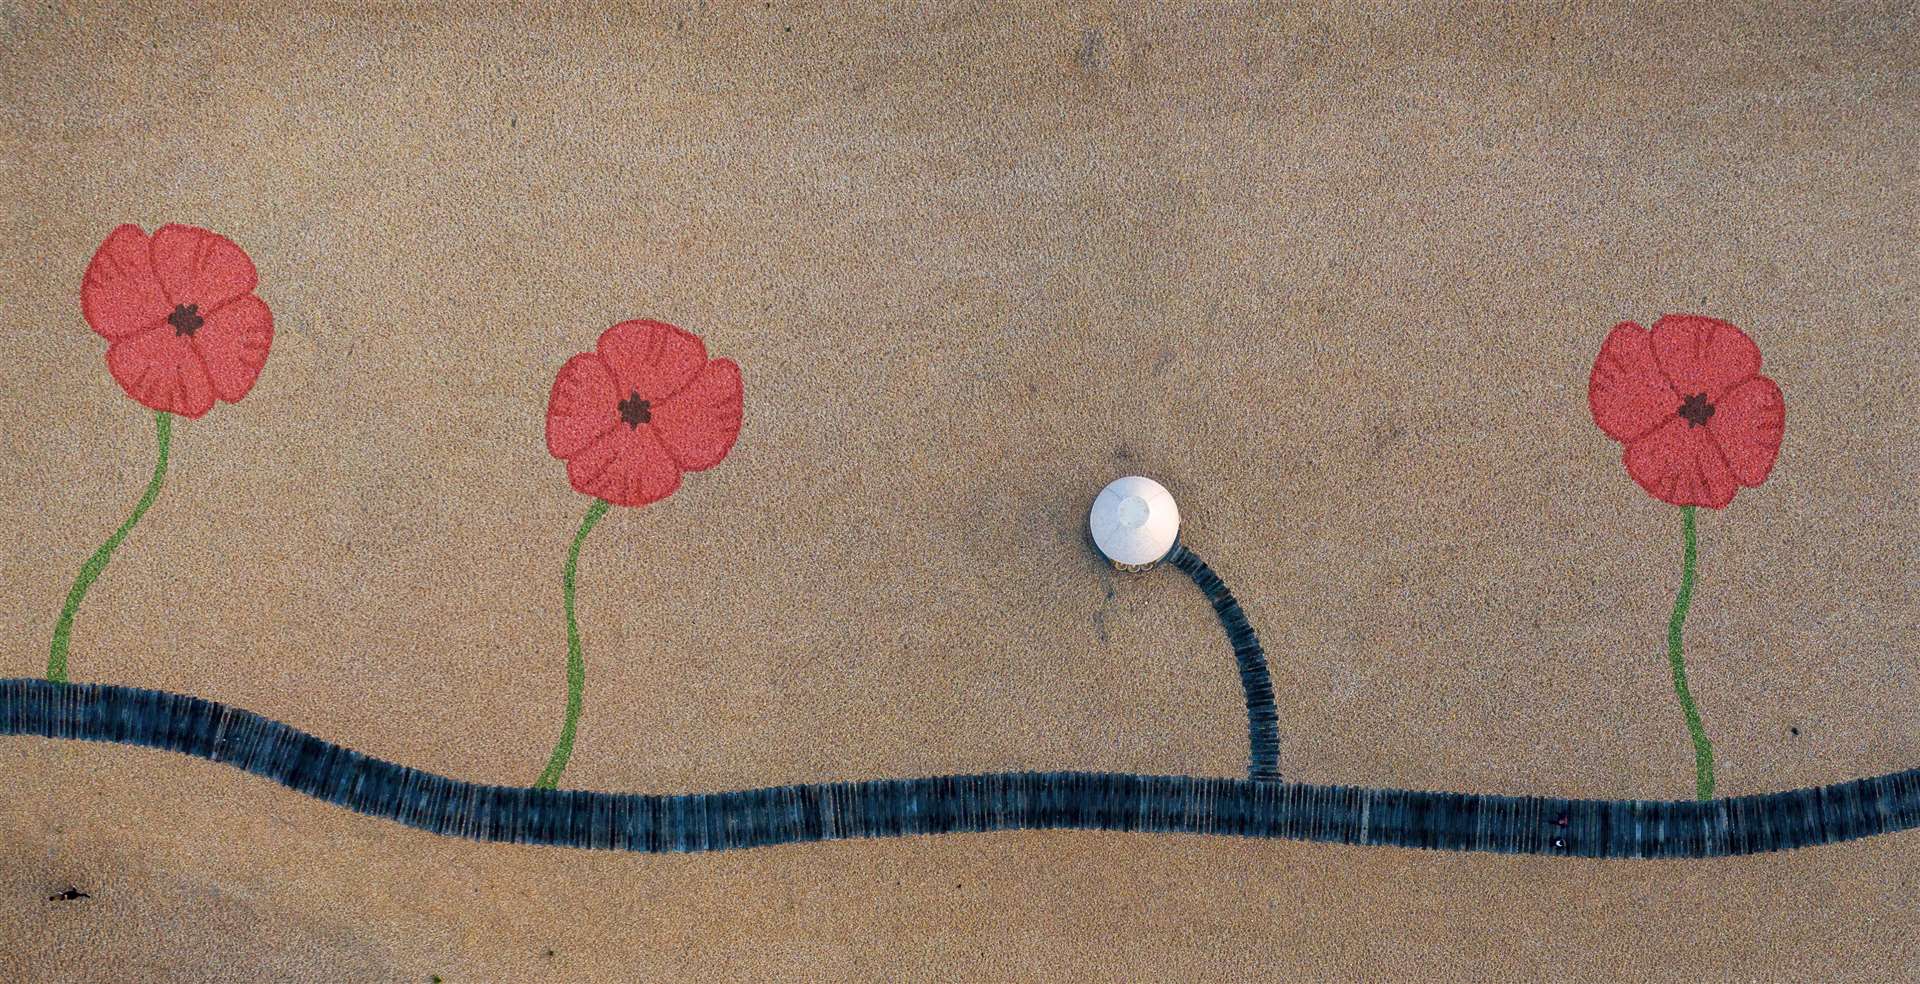 The poppies will be part of the 'Lasting Memories' art project